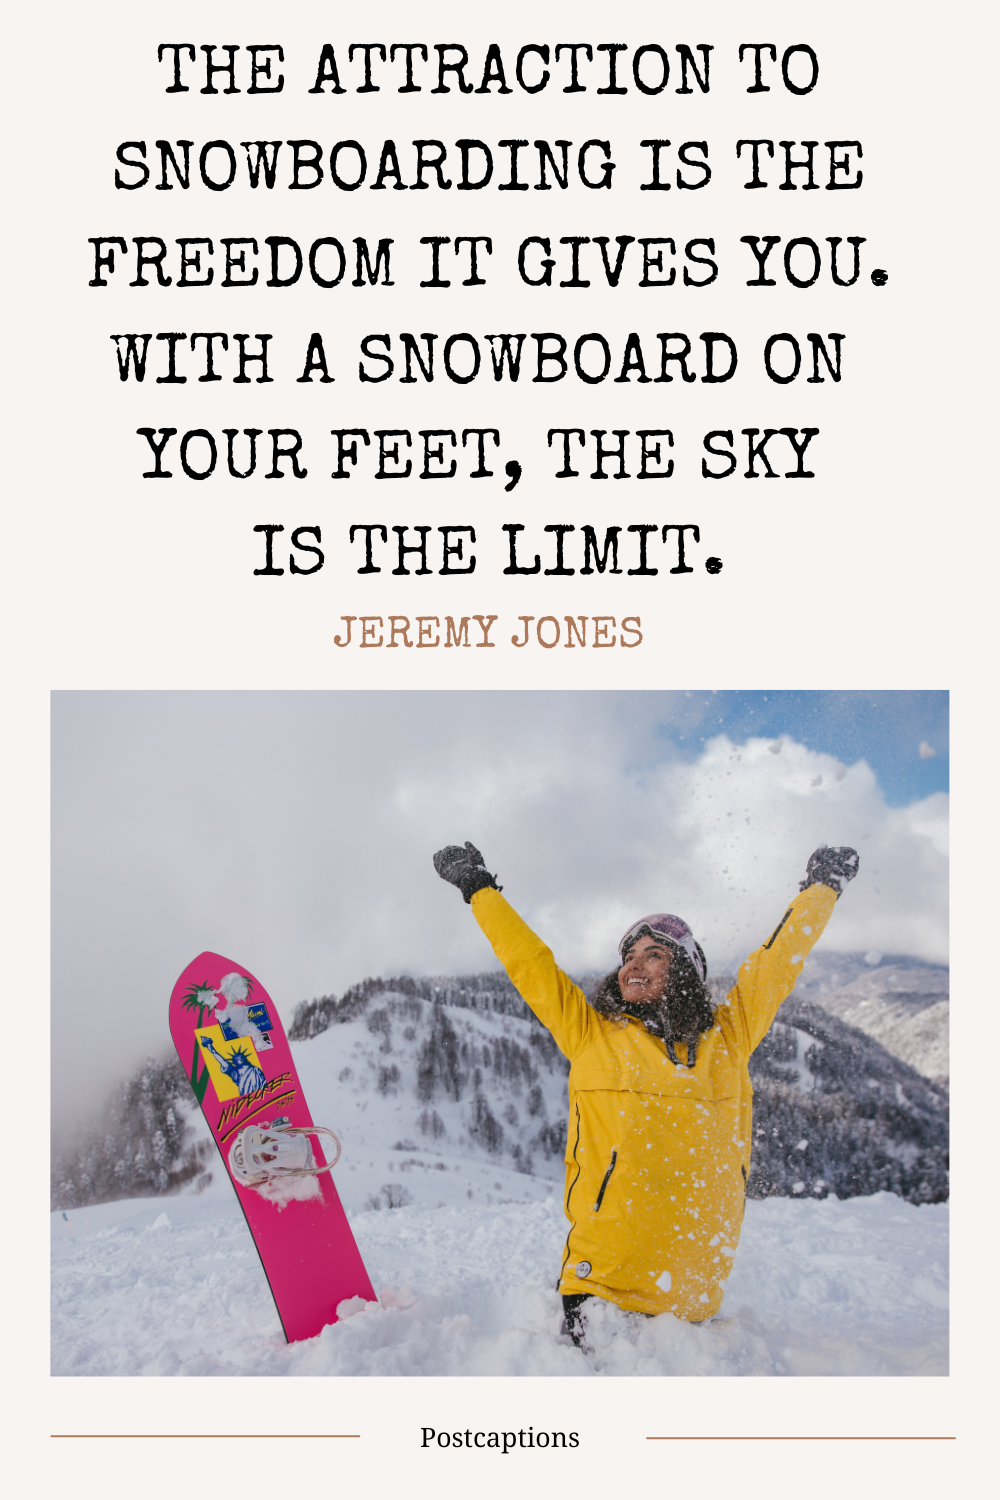 Snowboarding Quotes for Instagram